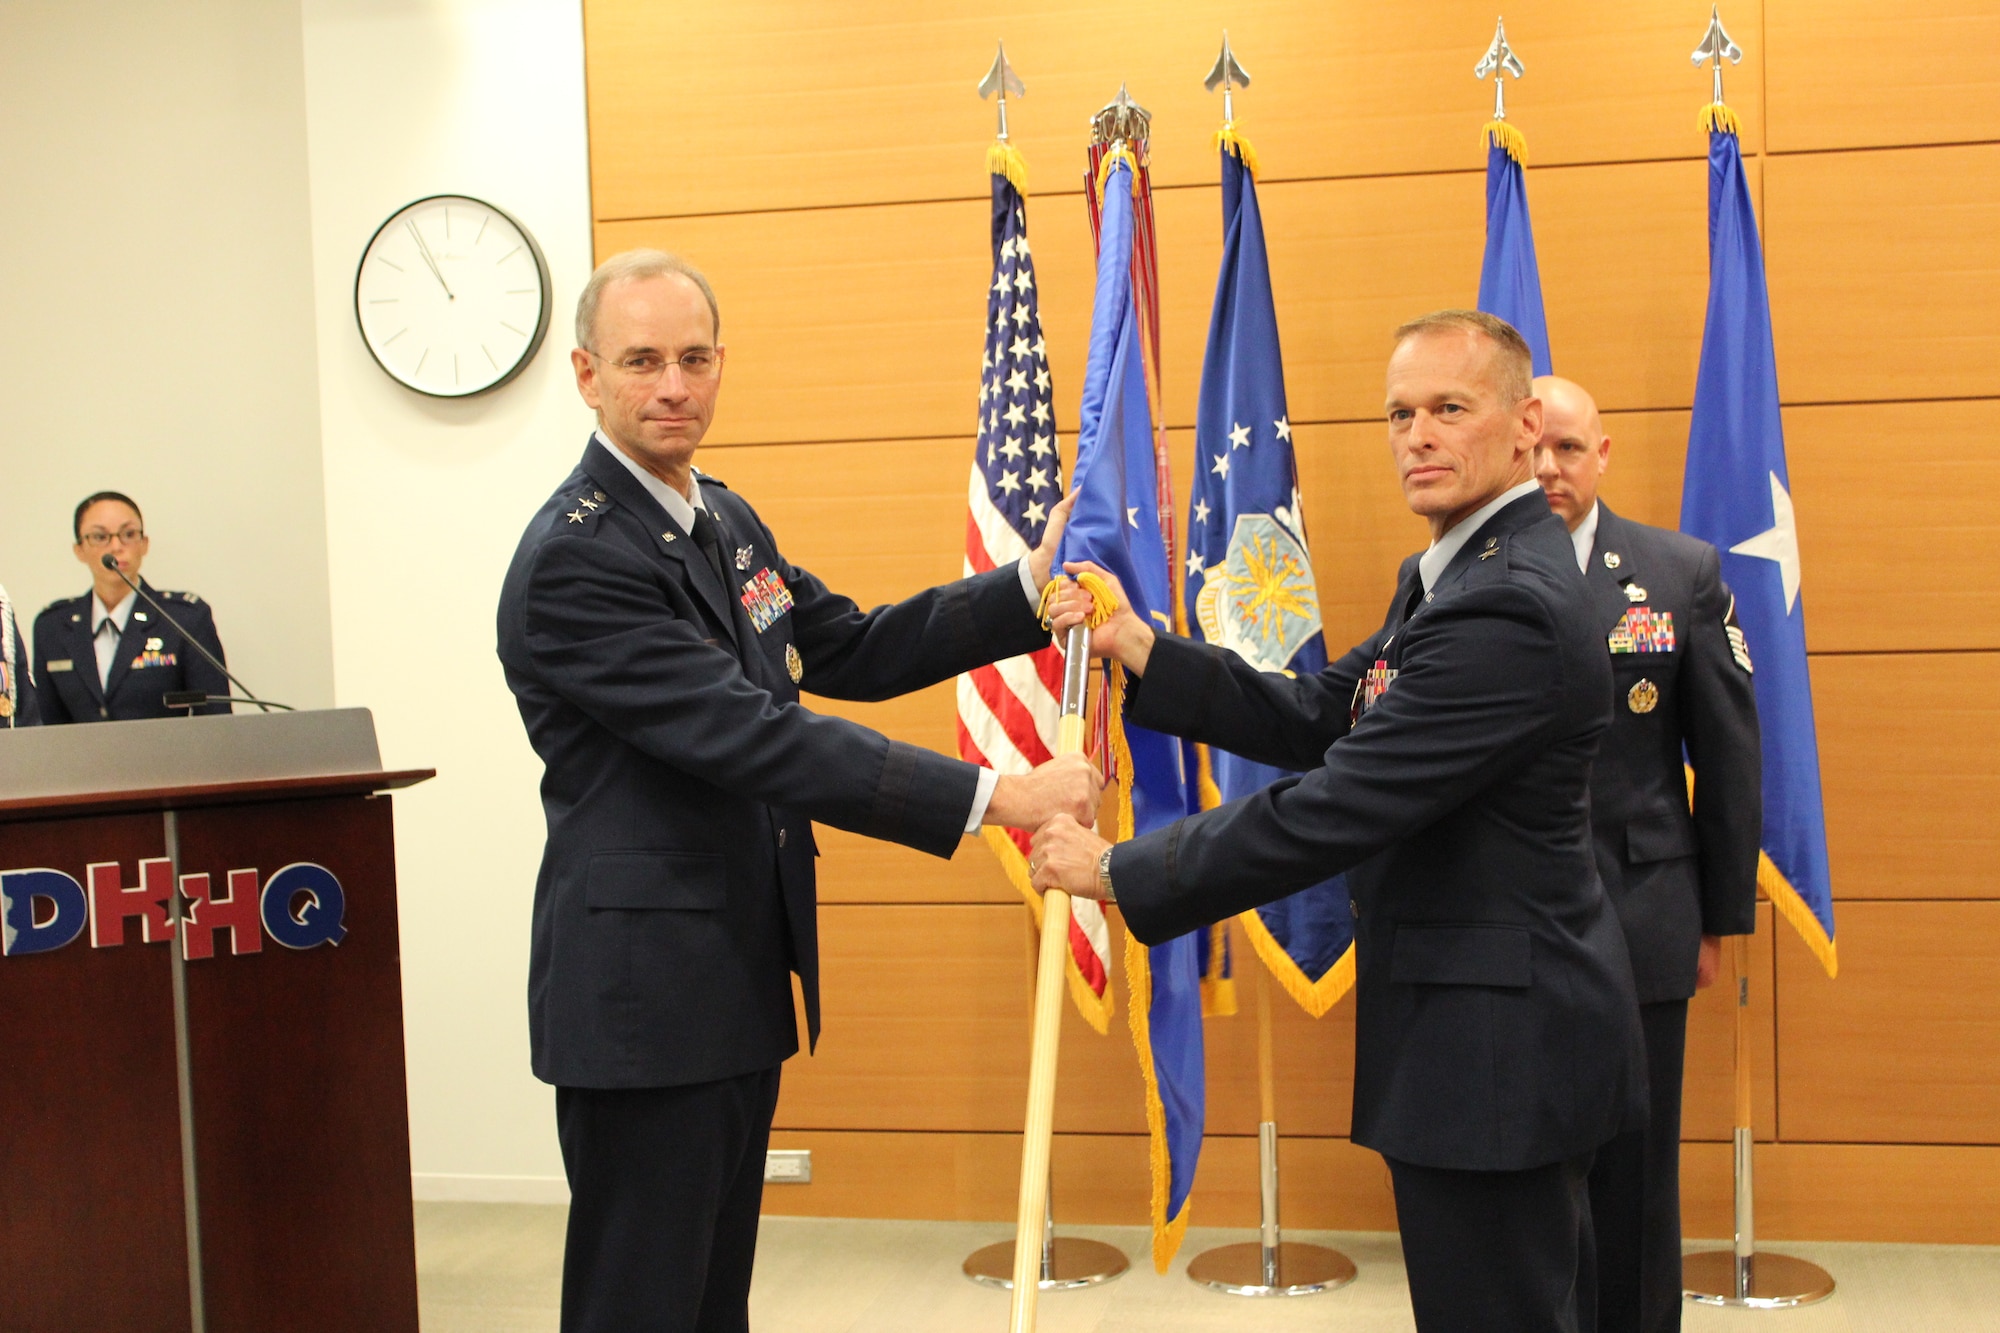 Maj. Gen. Mark A. Ediger, Deputy Air Force Surgeon General, officiates the promotion and change of command ceremony of Brig. Gen. James E. McClain, the new Commander, Air Force Medical Support Agency, at the Defense Health Headquarters in Falls Church, Va. on Sept. 26, 2013.  General McClain also will serve as the 17th Biomedical Sciences Corps chief  and Assistant Surgeon General for Modernization, where he oversees daily operations of the Modernization Directorate for requirements, aerospace medicine and information management and technology for the AFMS. (U.S. Air Force photo / Jon Stock)